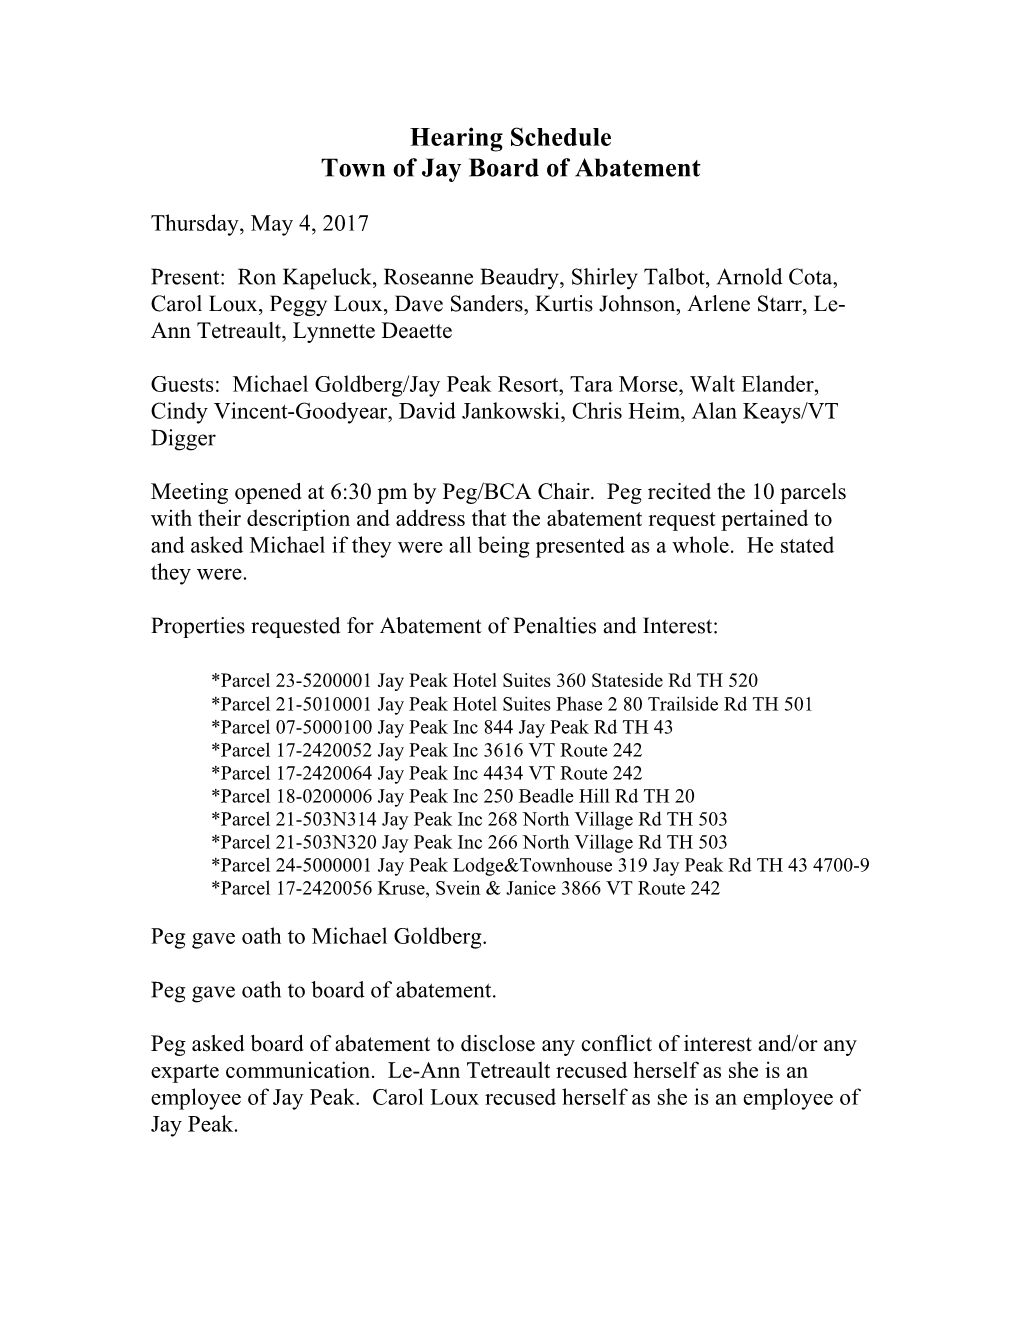 Town of Jay Board of Abatement